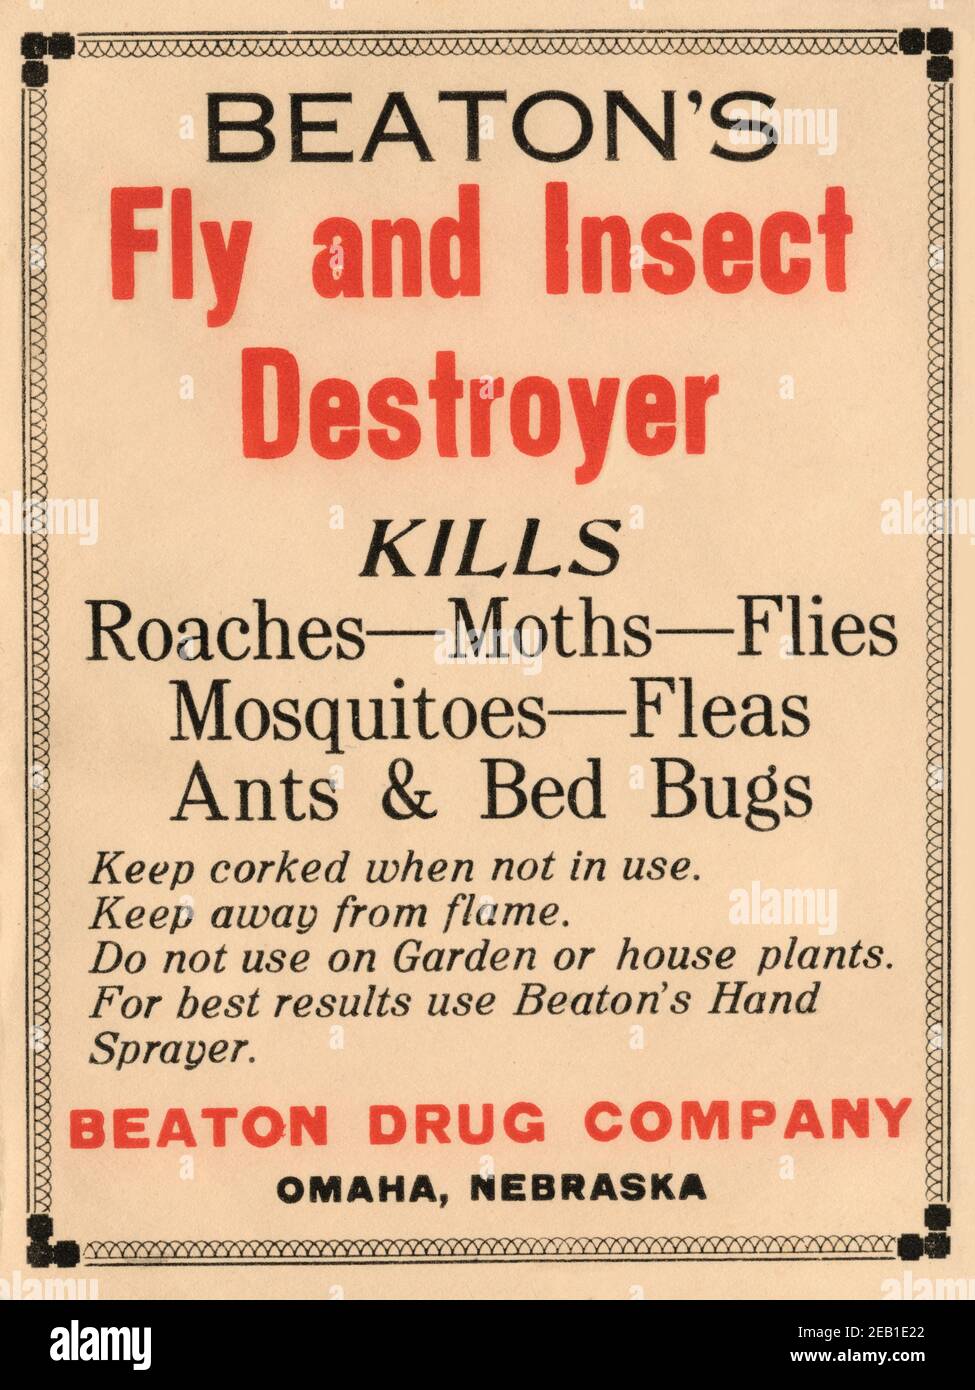 Beaton's Fly e Insect Destroyer 1920 Foto Stock